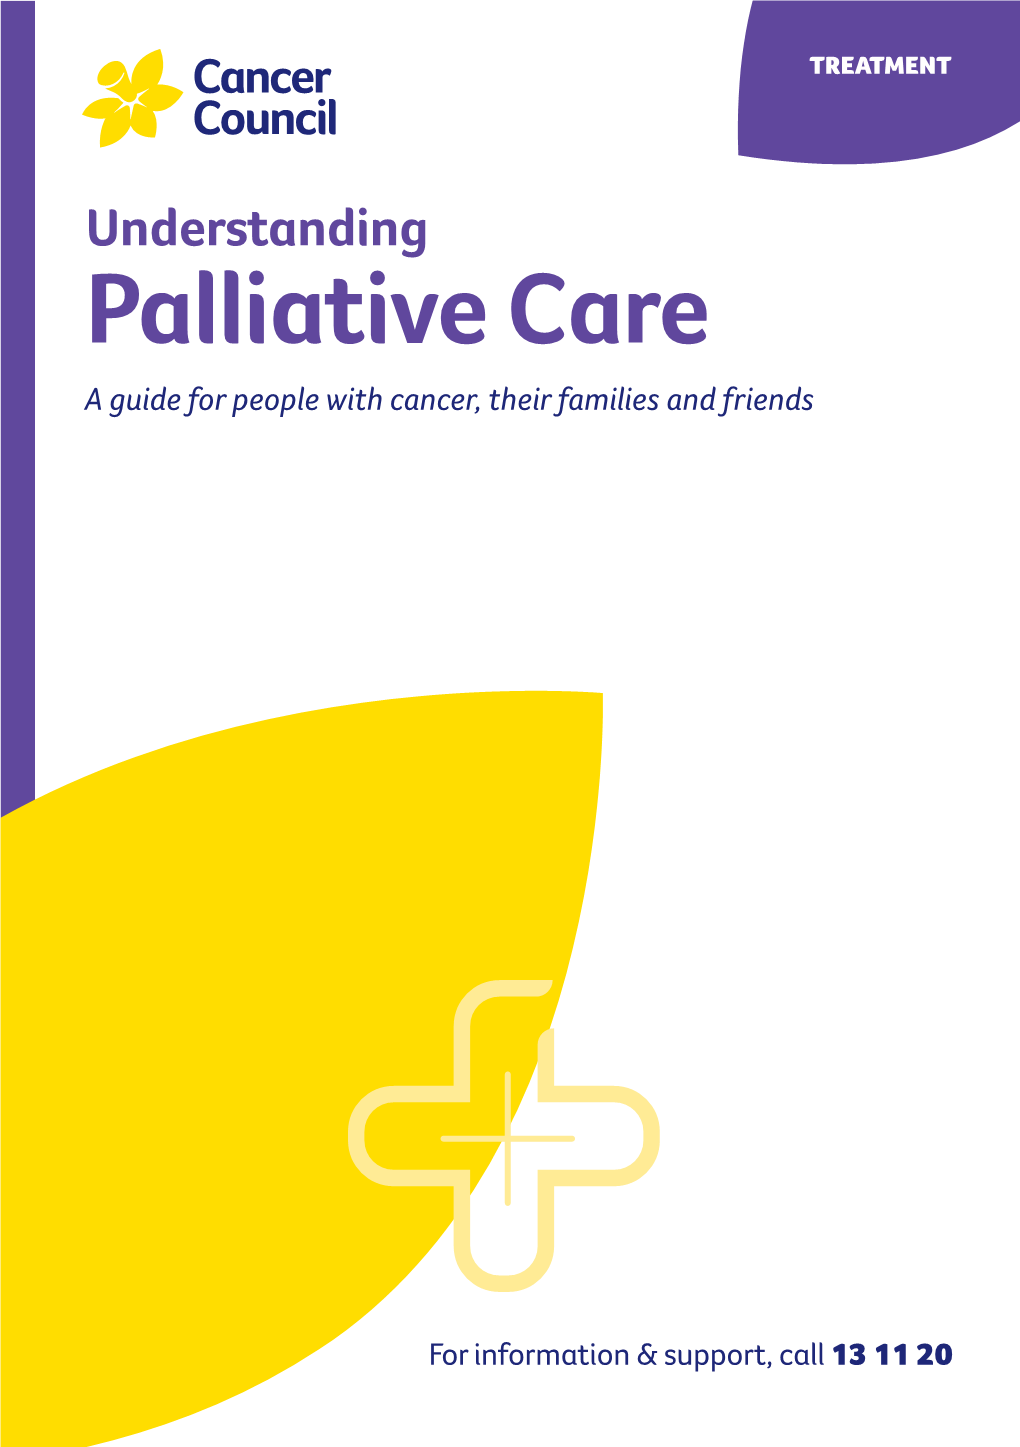 UNDERSTANDING PALLIATIVE CARE AUG 2021 CAN486 Understanding Palliative Care a Guide for People with Cancer, Their Families and Friends First Published September 2003